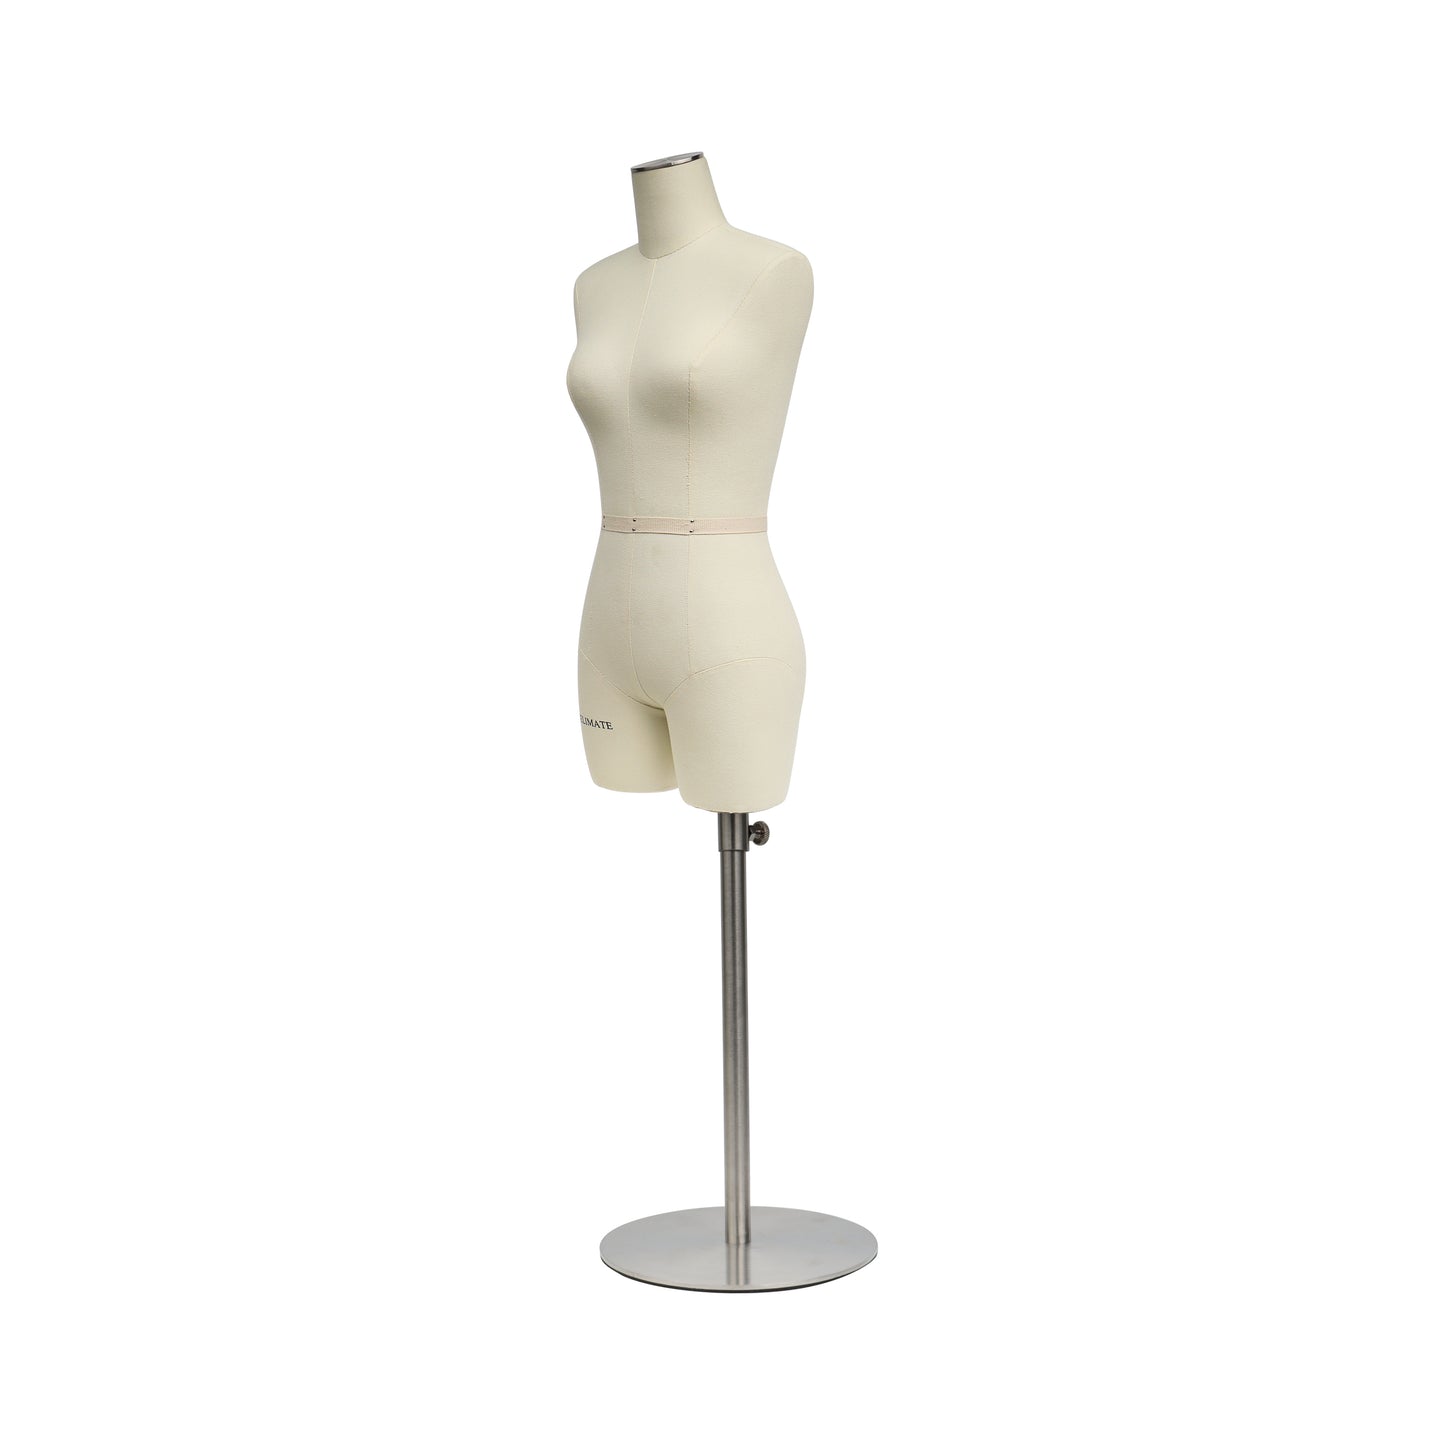 JMSIZE10 Half Scale Female Dress Form For Pattern Making,1/2 Scale Miniature Sewing Mannequin for Women,Mini Tailor Mannequin for Fashion Designer Fashion School Draping Mannequin